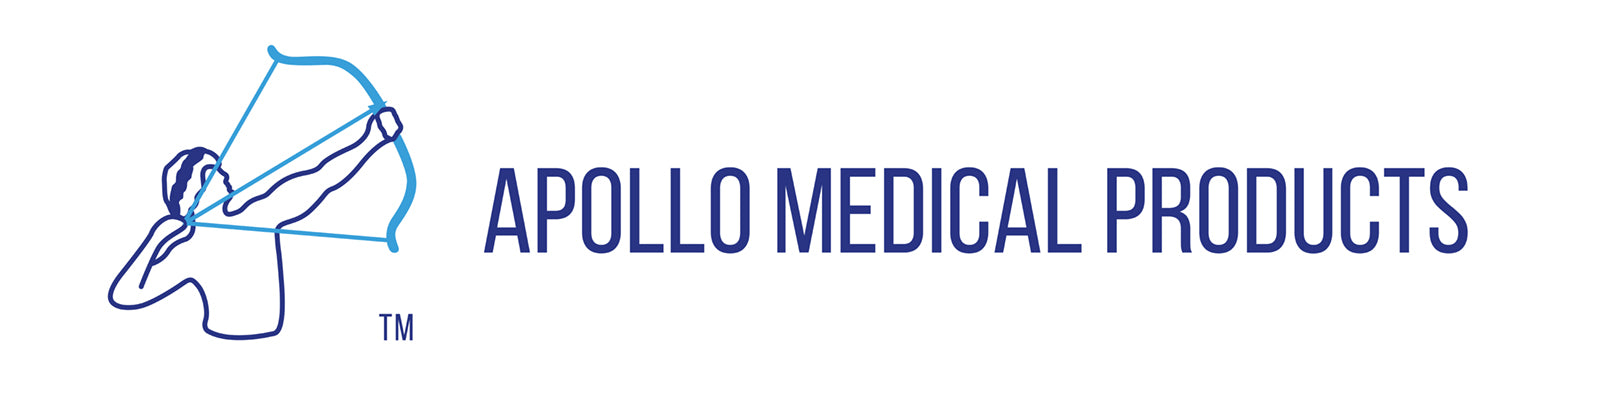 Apollo Medical Products